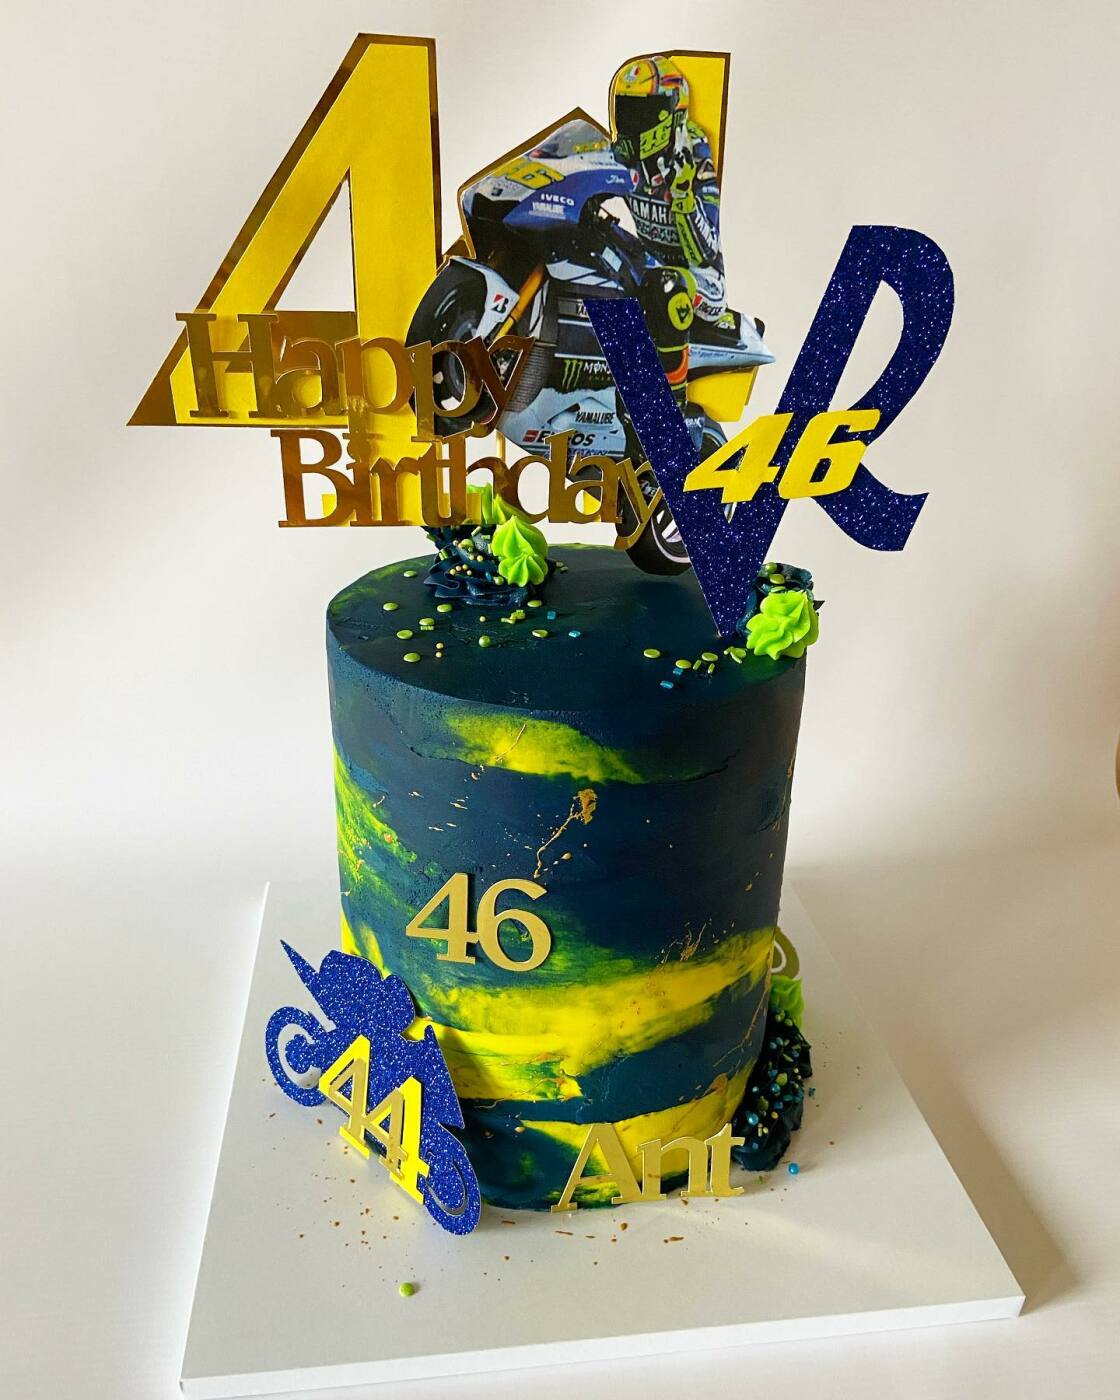 Valentino Rossi Cake ...Made By Gio | Motorcycle birthday cakes, Themed  birthday cakes, Motorcycle cake